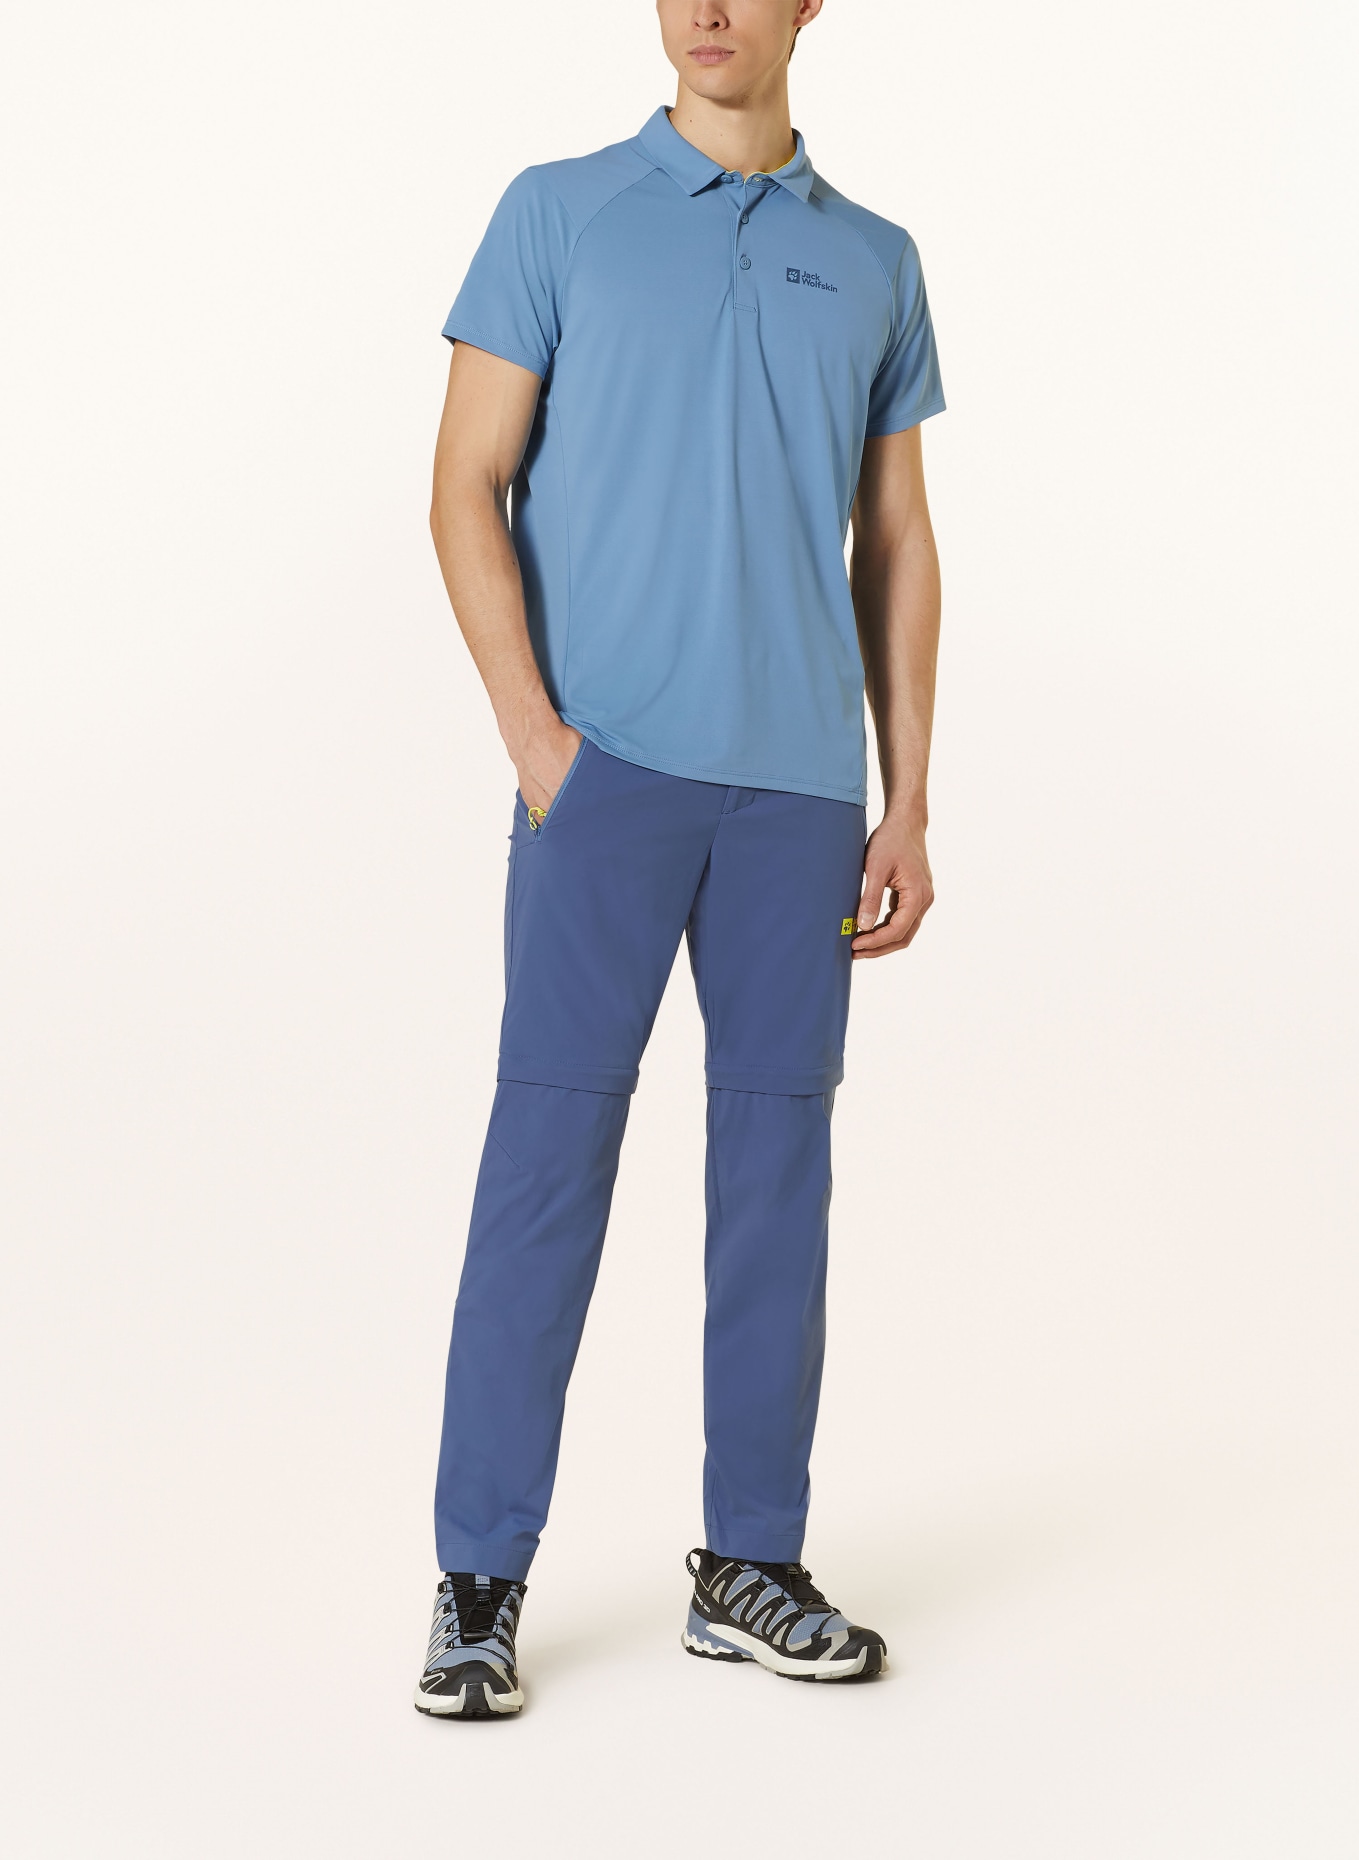 Jack Wolfskin Performance polo shirt PRELIGHT TRAIL, Color: BLUE (Image 2)